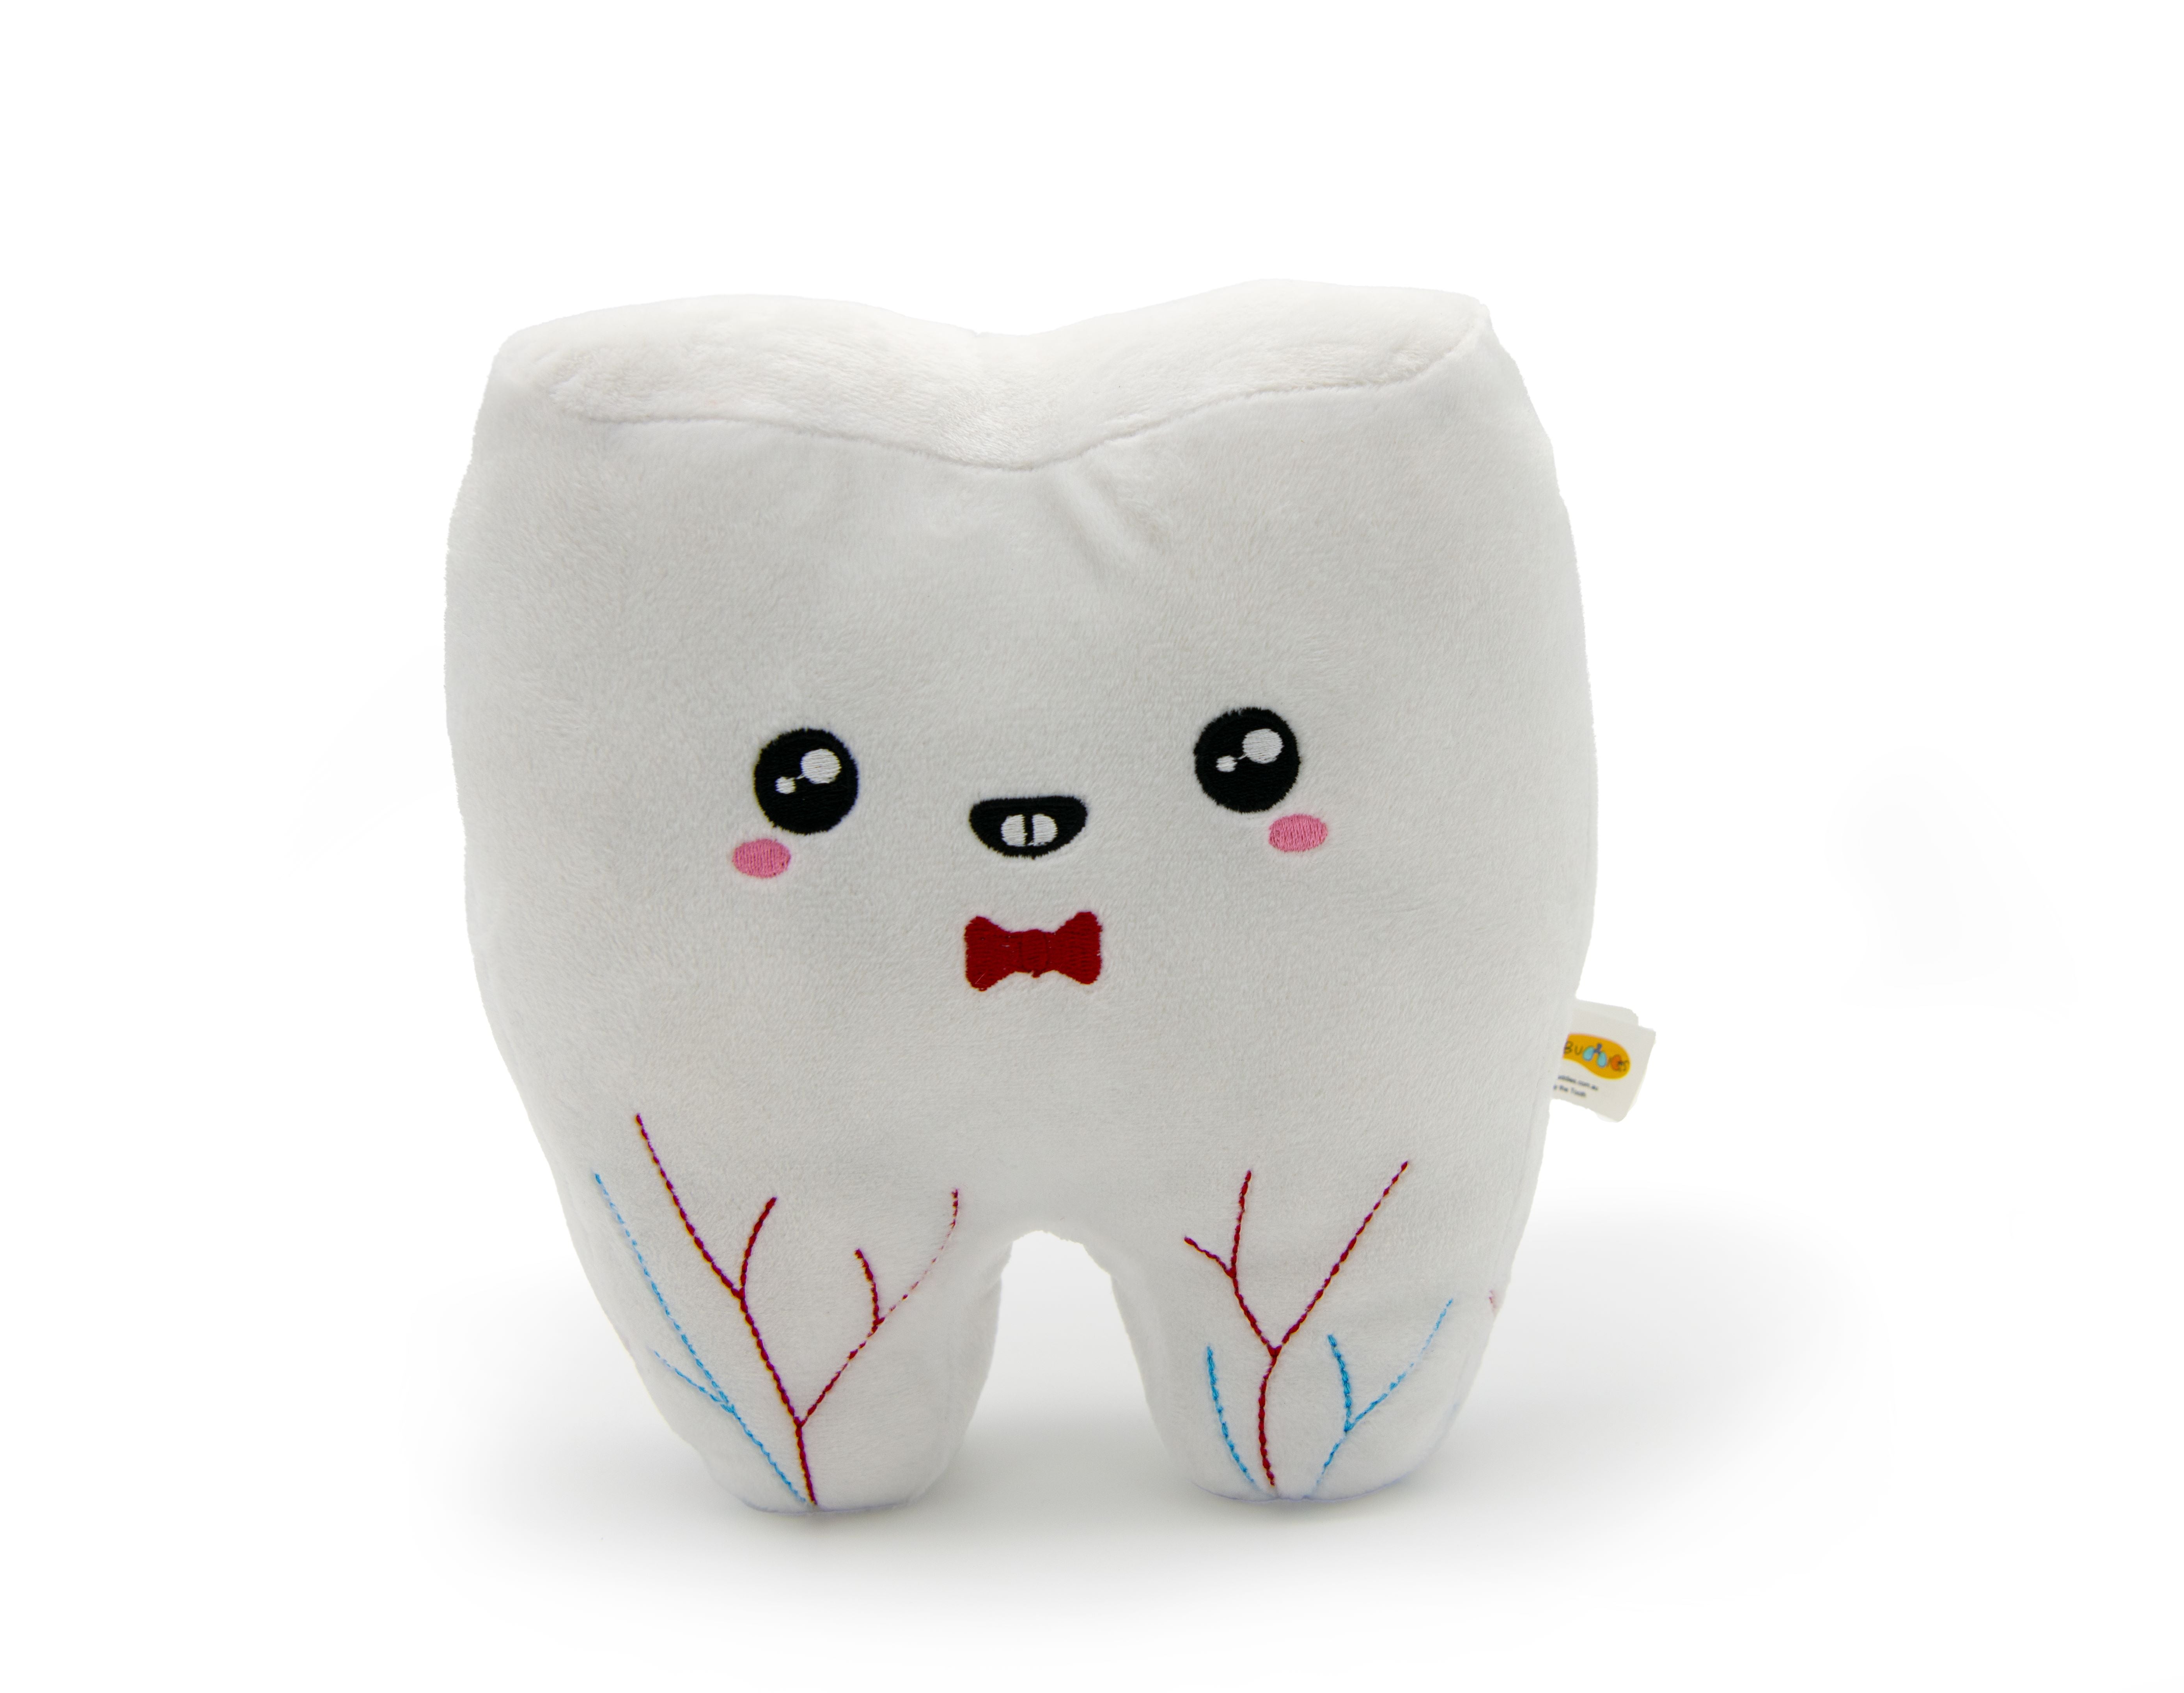 Enamely the Tooth Plushie